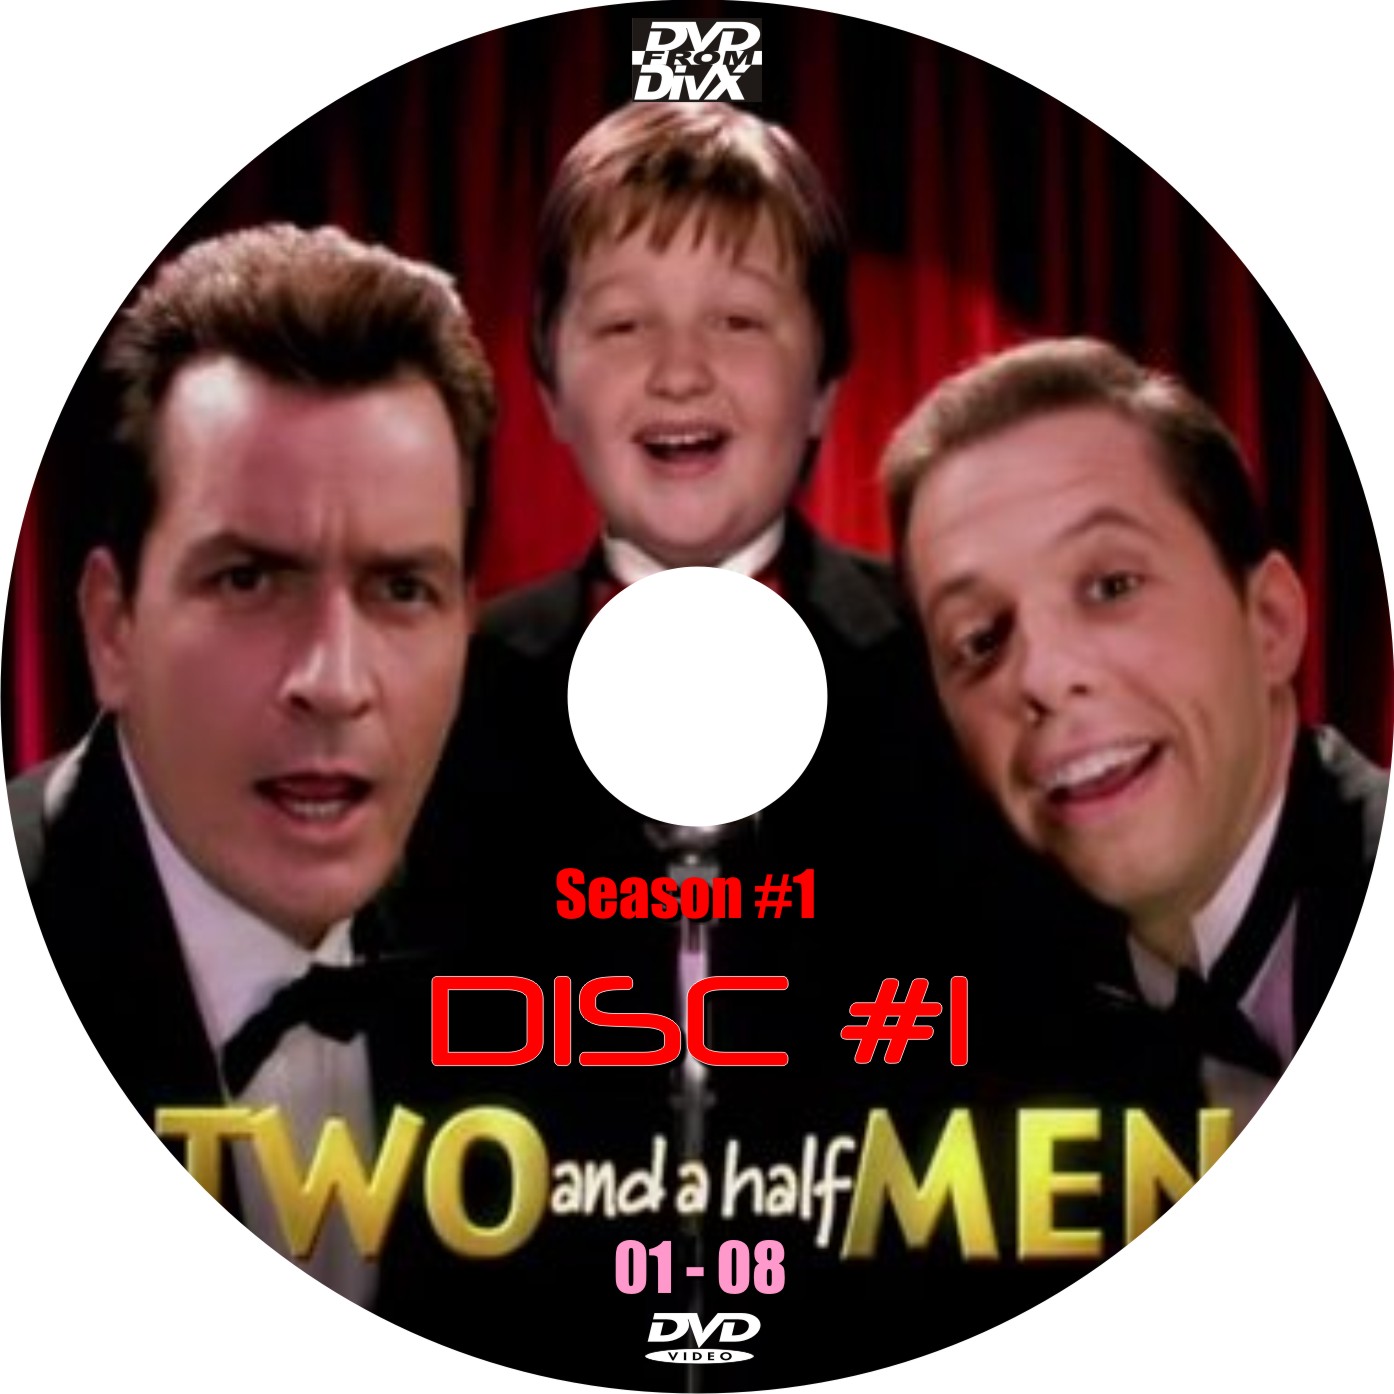 DVD_2andHalfMan_S1D1_Cover.jpg